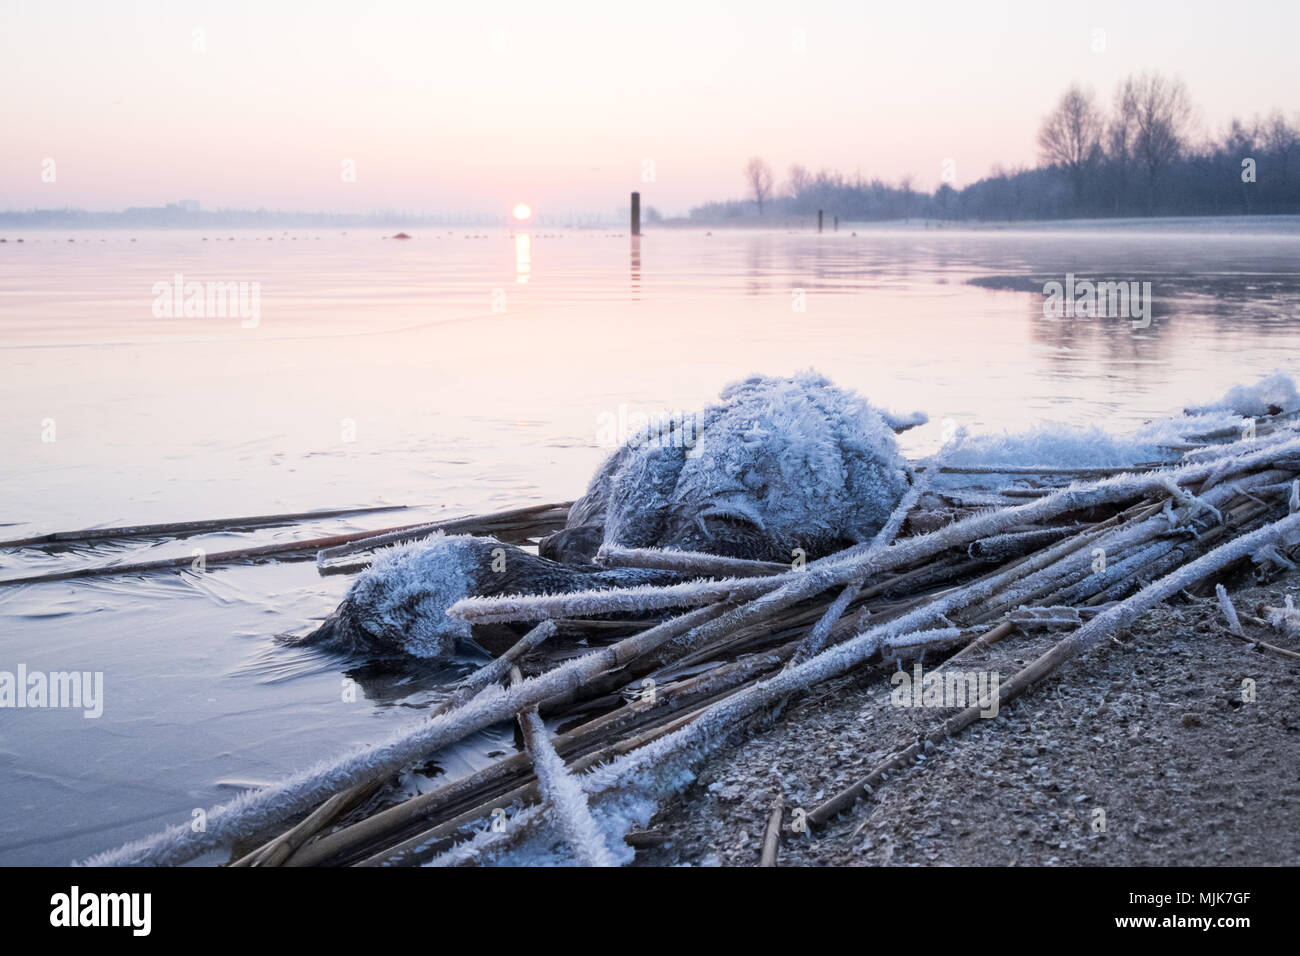 A early winter's morning scene on a lake with a dead duck in the foreground and rising sun in the back. Stock Photo